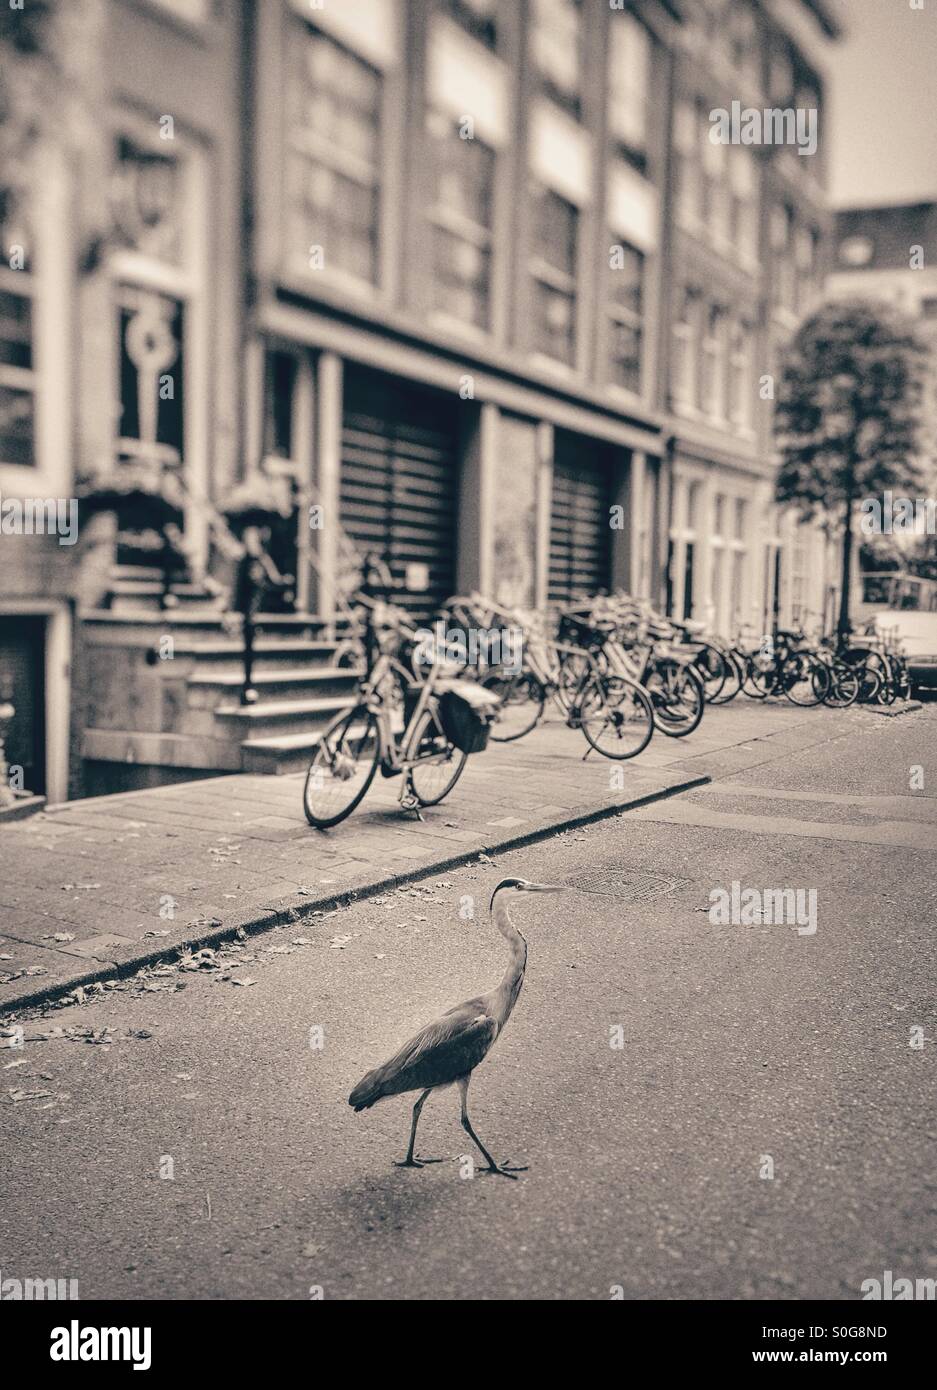 A large bird stalks the streets of Amsterdam in the Netherlands EU Stock Photo